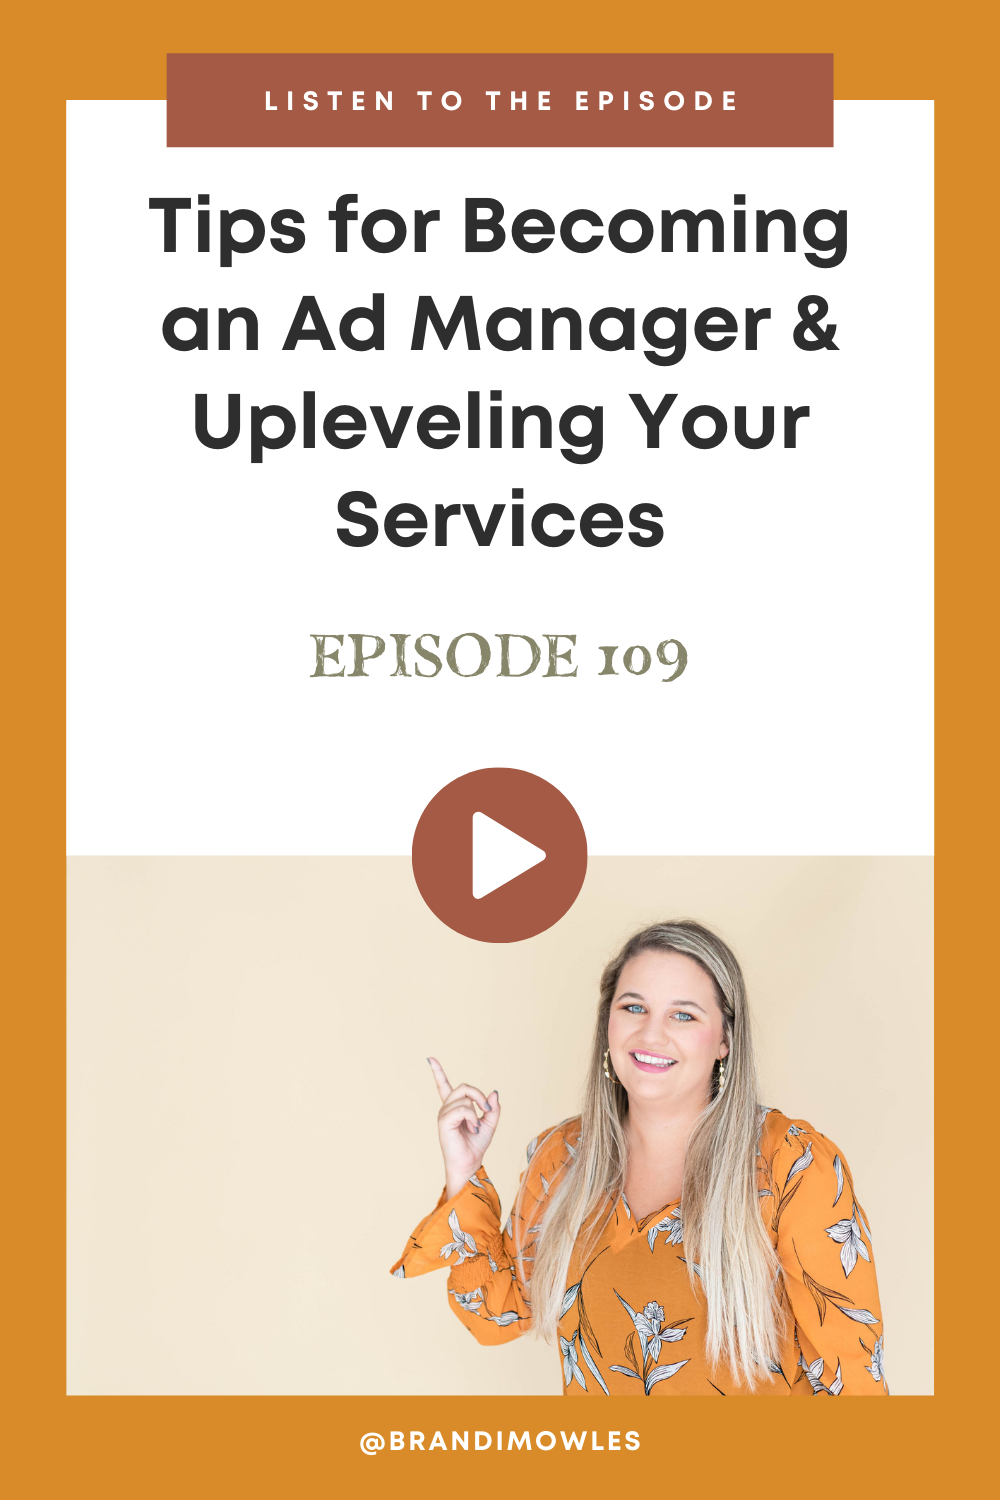 Becoming an Ad Manager & Upleveling Your Services